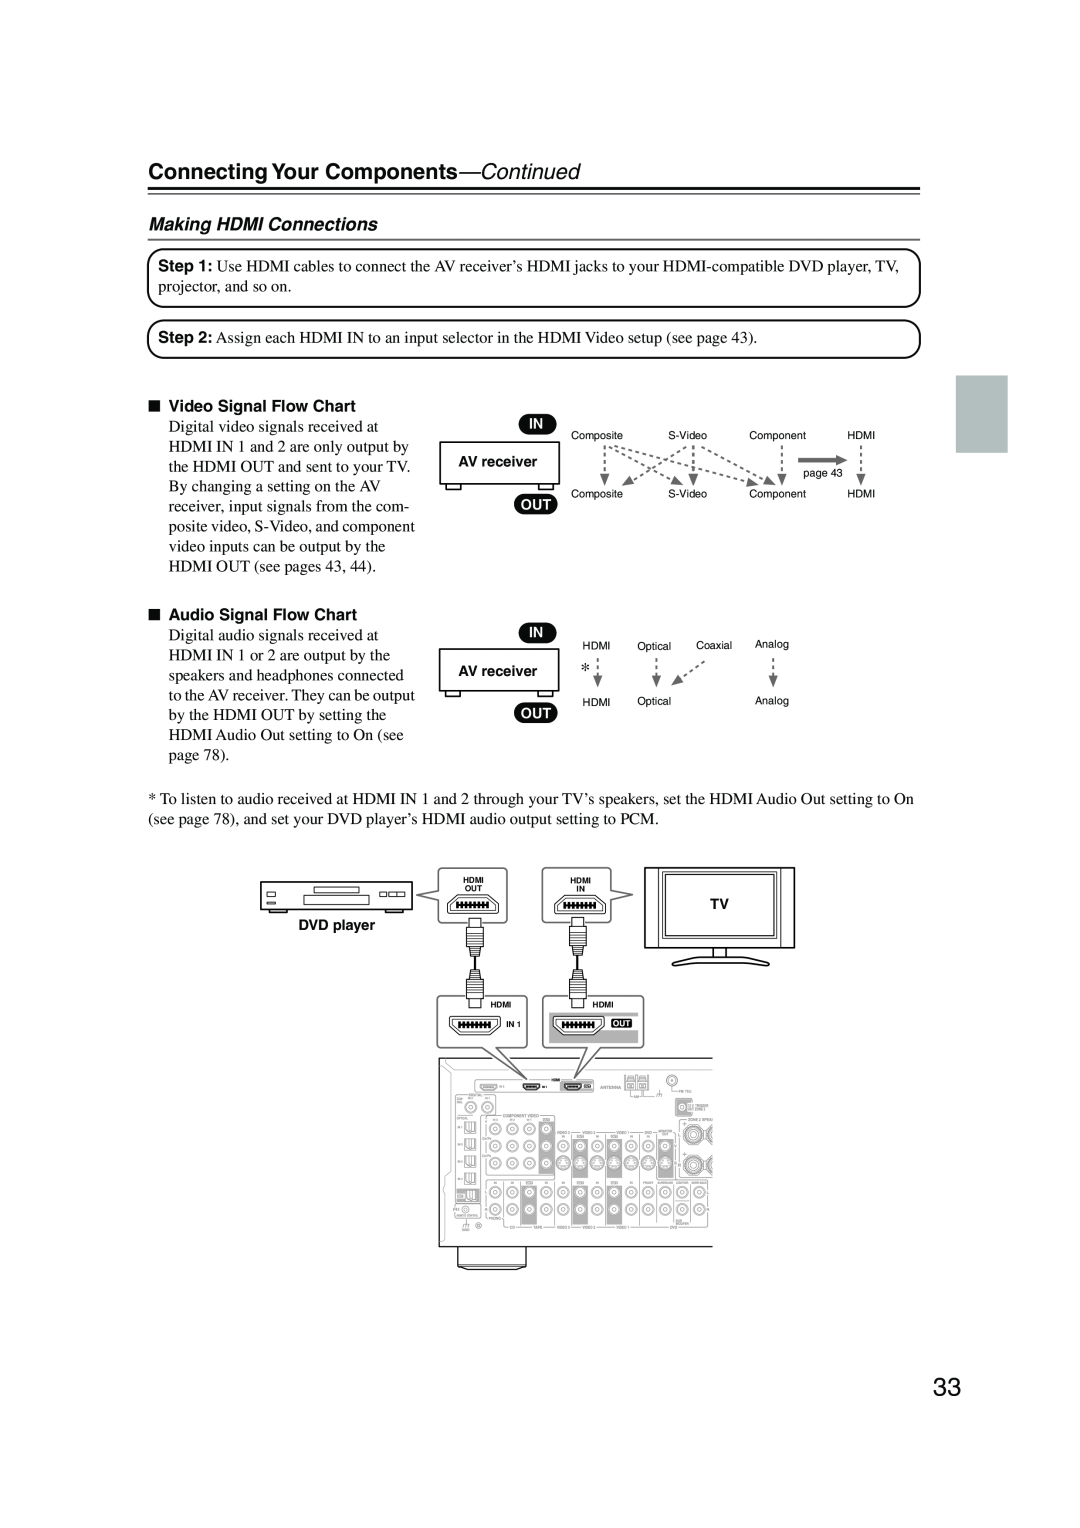 Onkyo SR804 instruction manual Making HDMI Connections, Connecting Your Components—Continued, Video Signal Flow Chart 